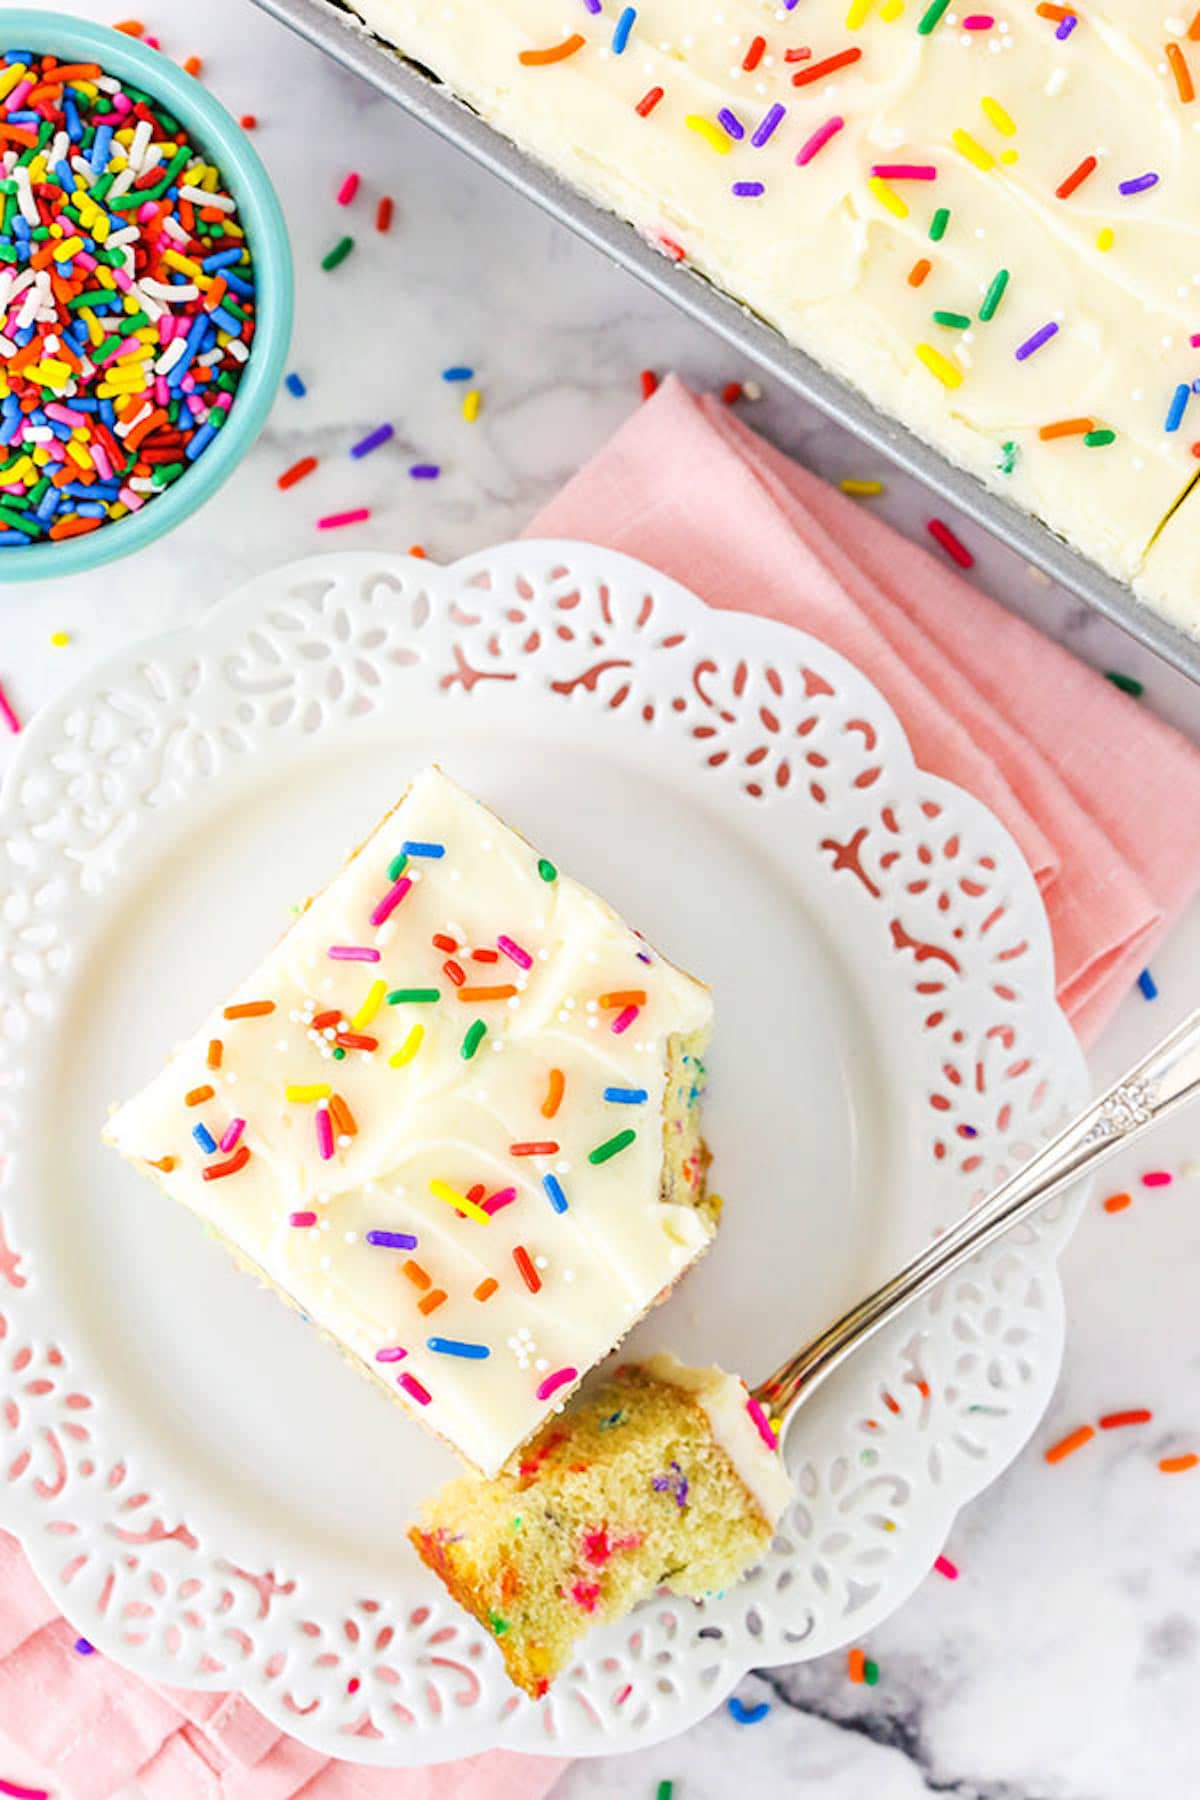 A Piece of Sprinkle Cake with Vanilla Frosting on a Fancy White Plate